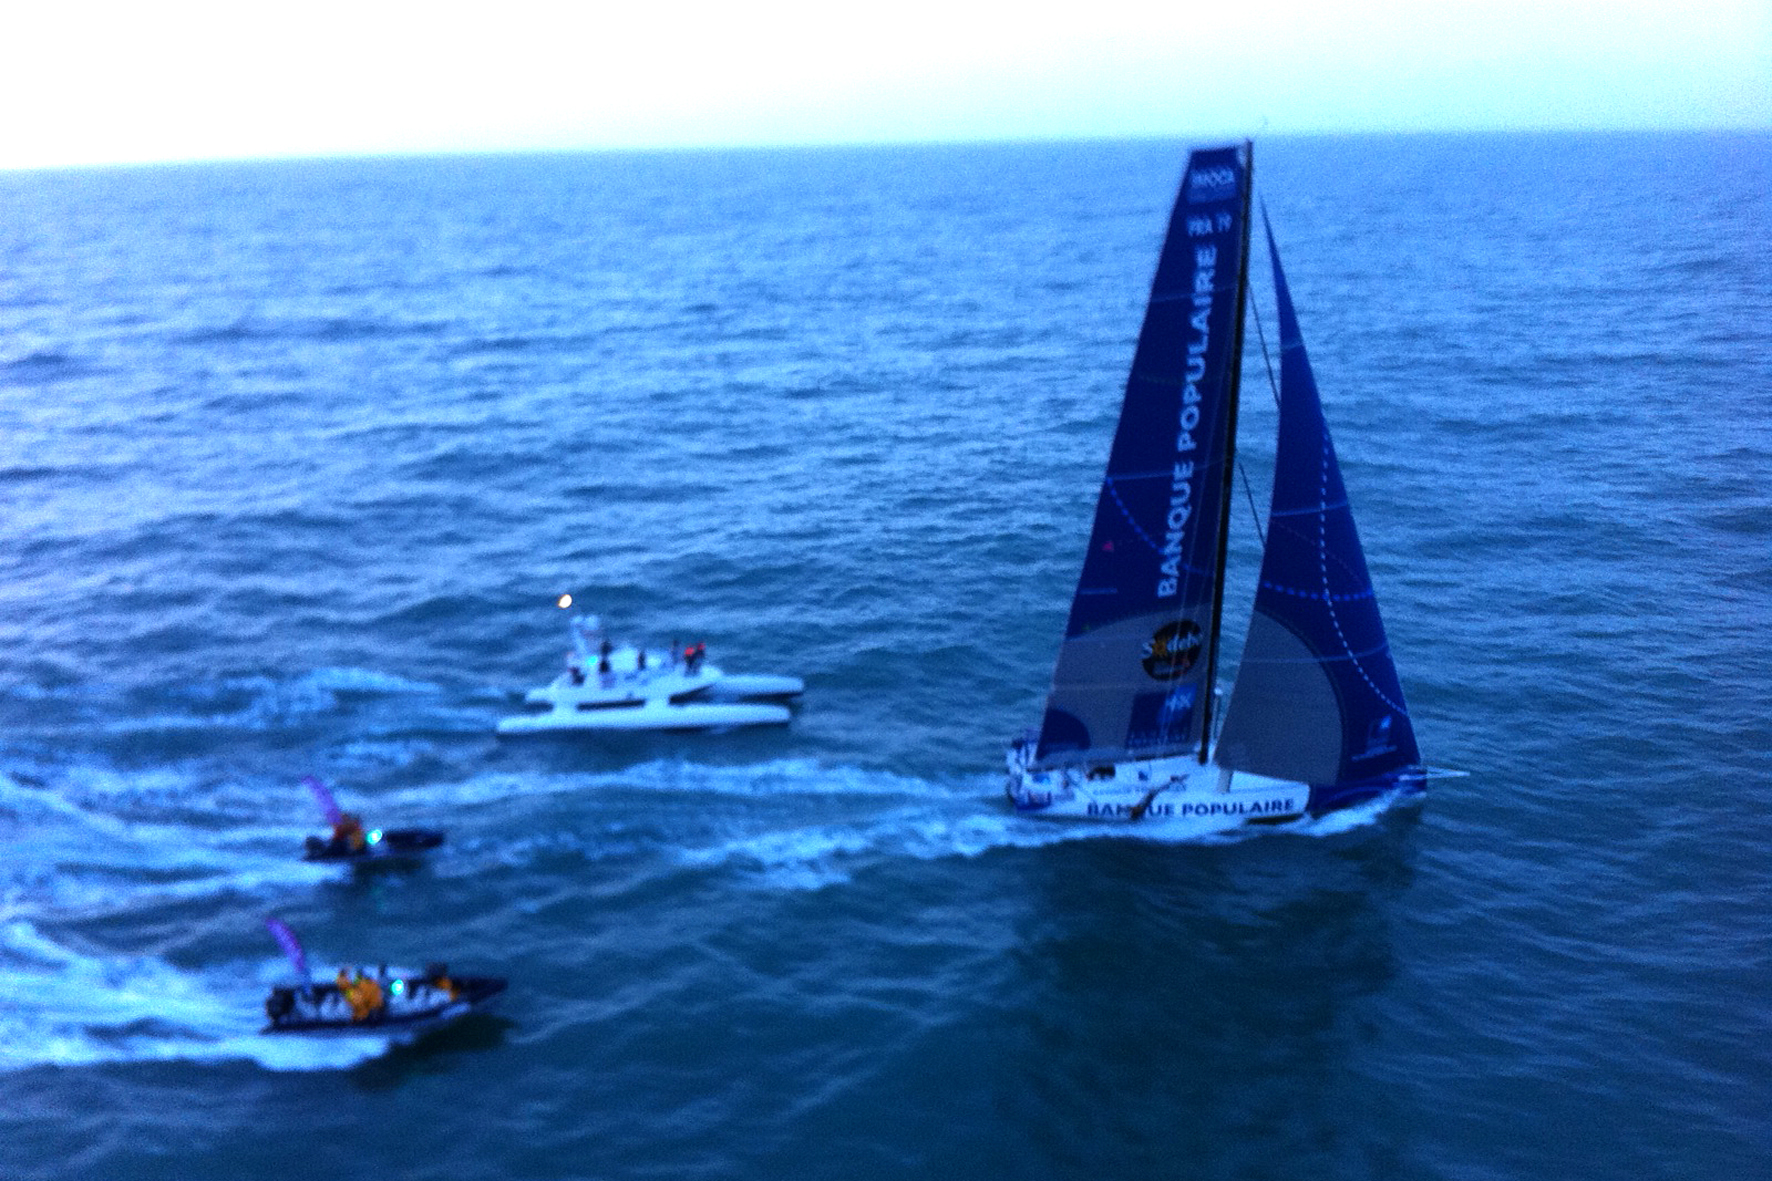 PHOTO OLIVIER BLANCHET / DPPI - VENDEE GLOBE FINISH FOR ARMEL LE CLEAC'H (FRA) / BANQUE POPULAIRE